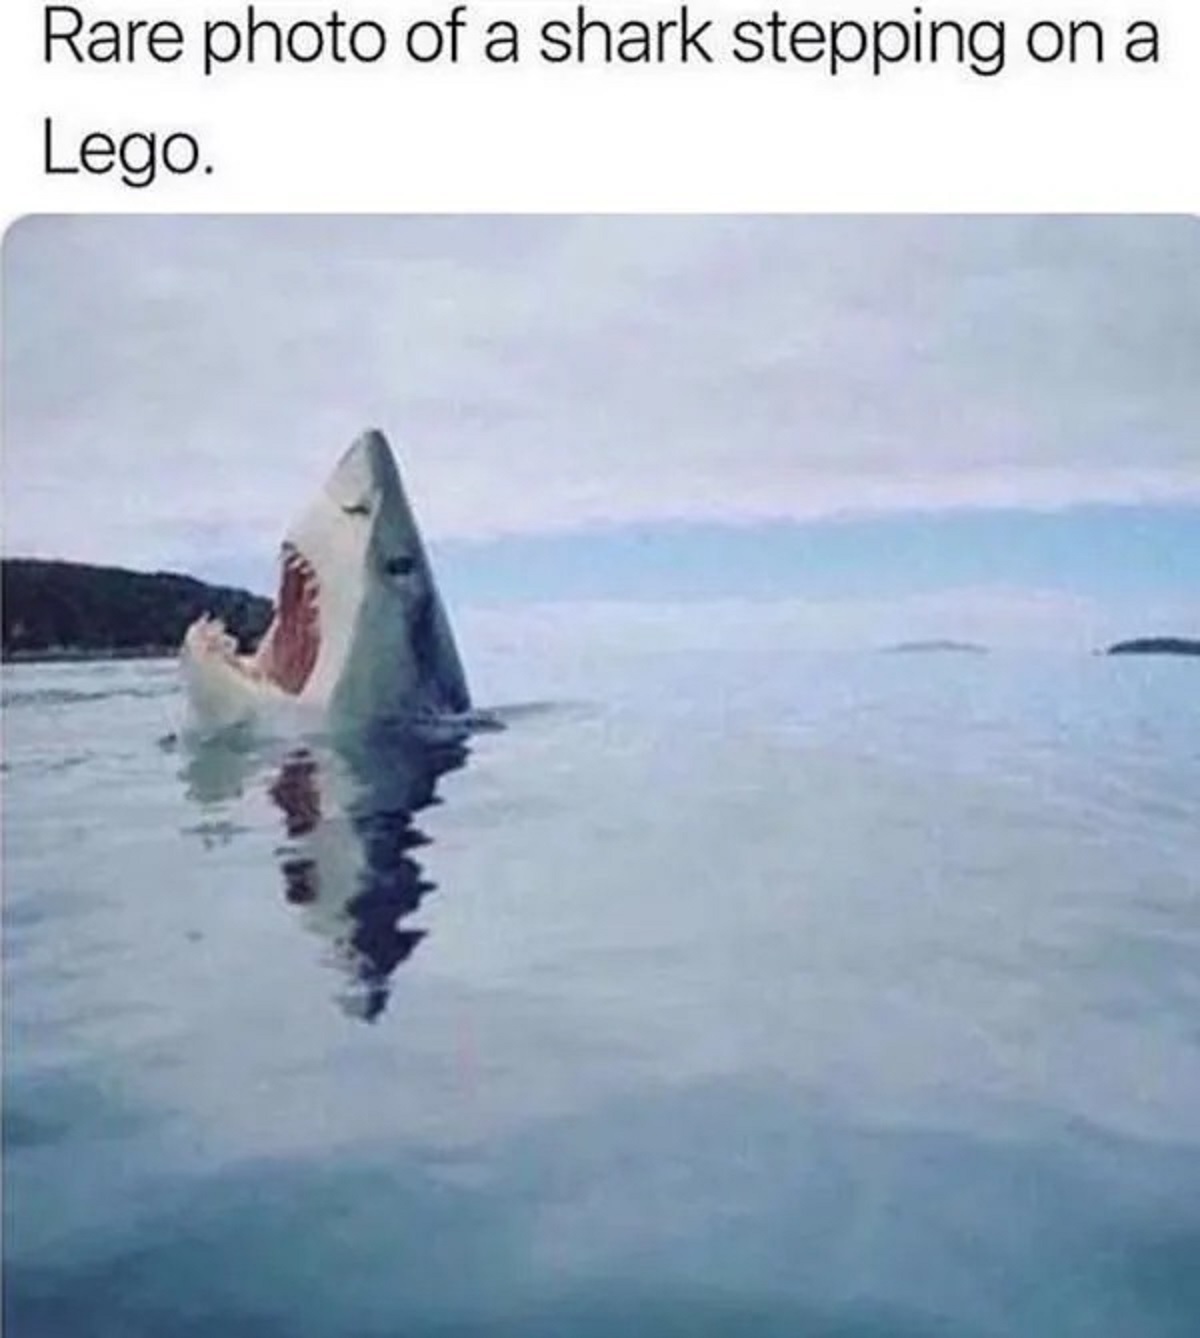 water - Rare photo of a shark stepping on a Lego.